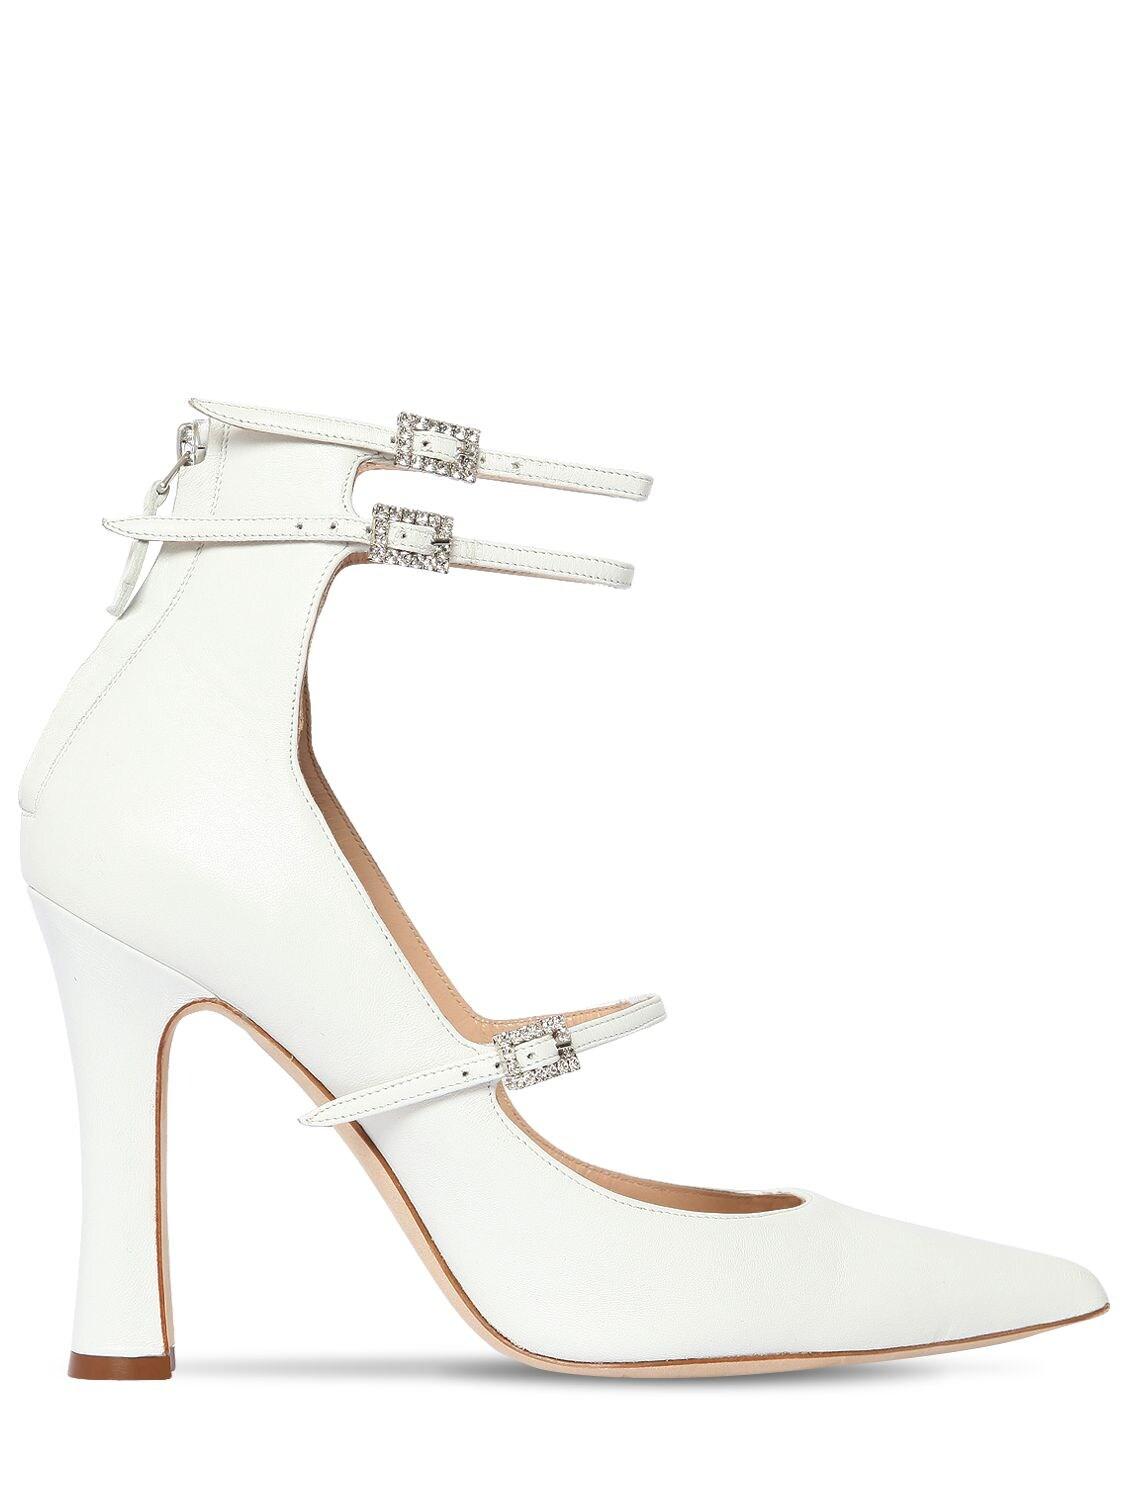 Alessandra Rich 105mm Mary Jane Leather Pumps in White - Lyst